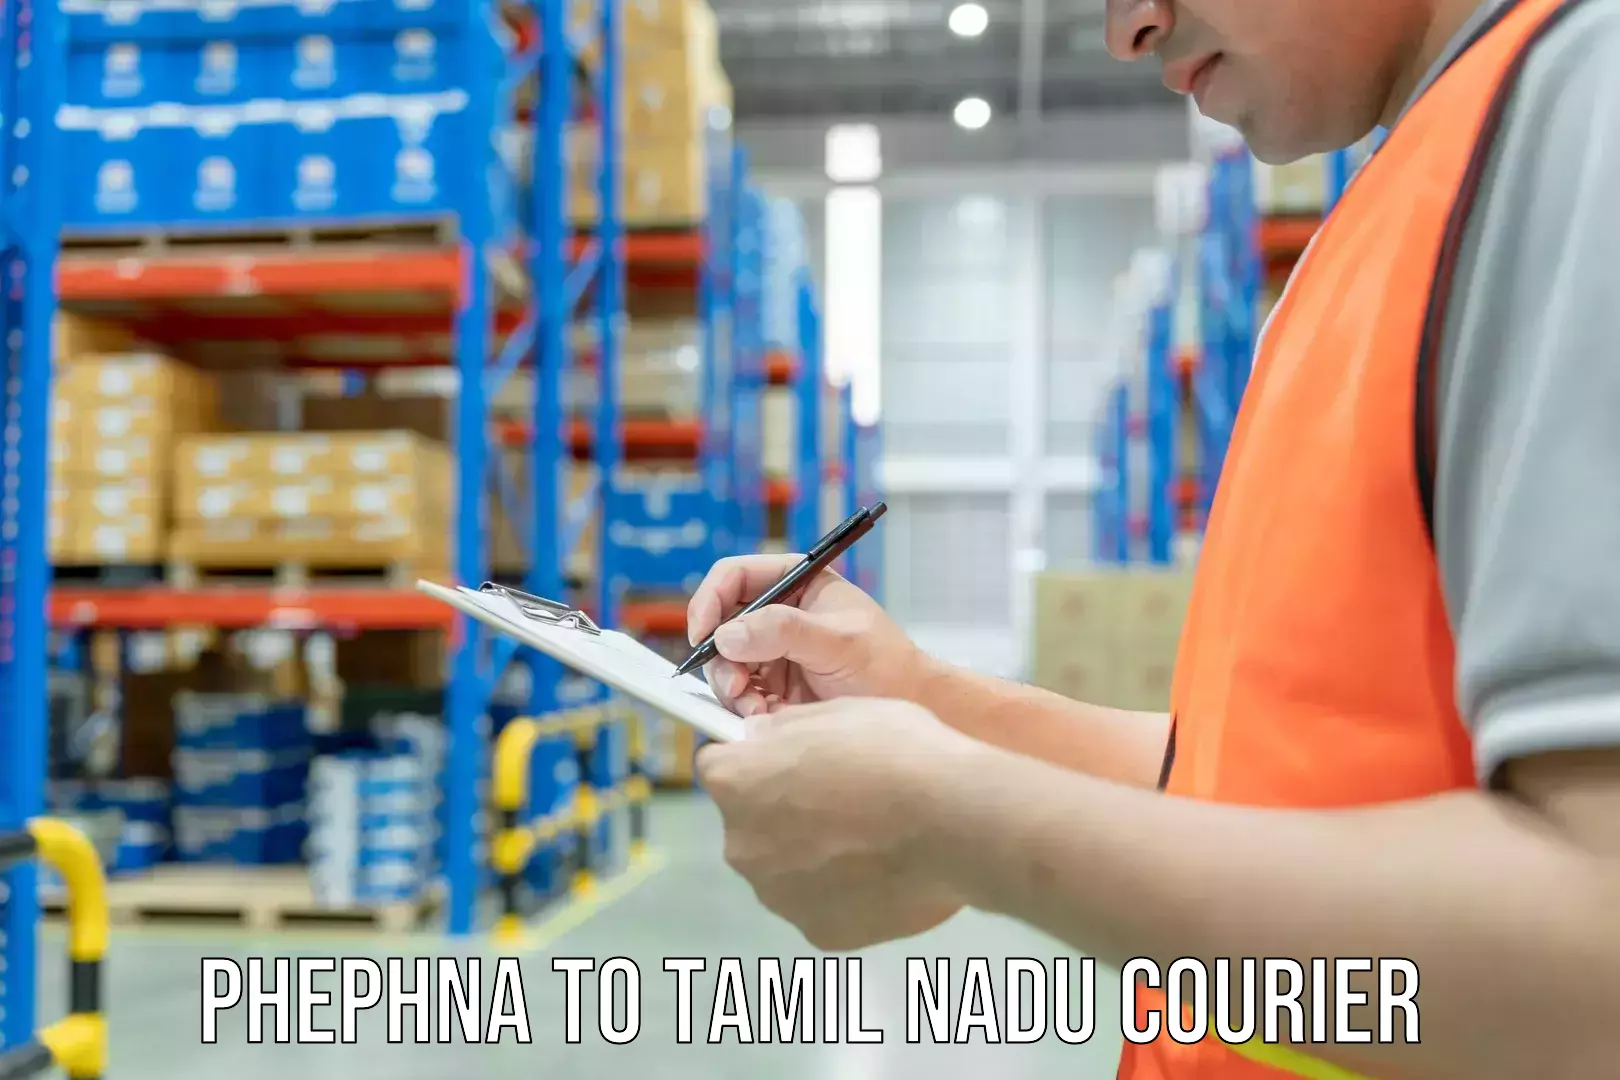 High-quality moving services Phephna to Tamil Nadu